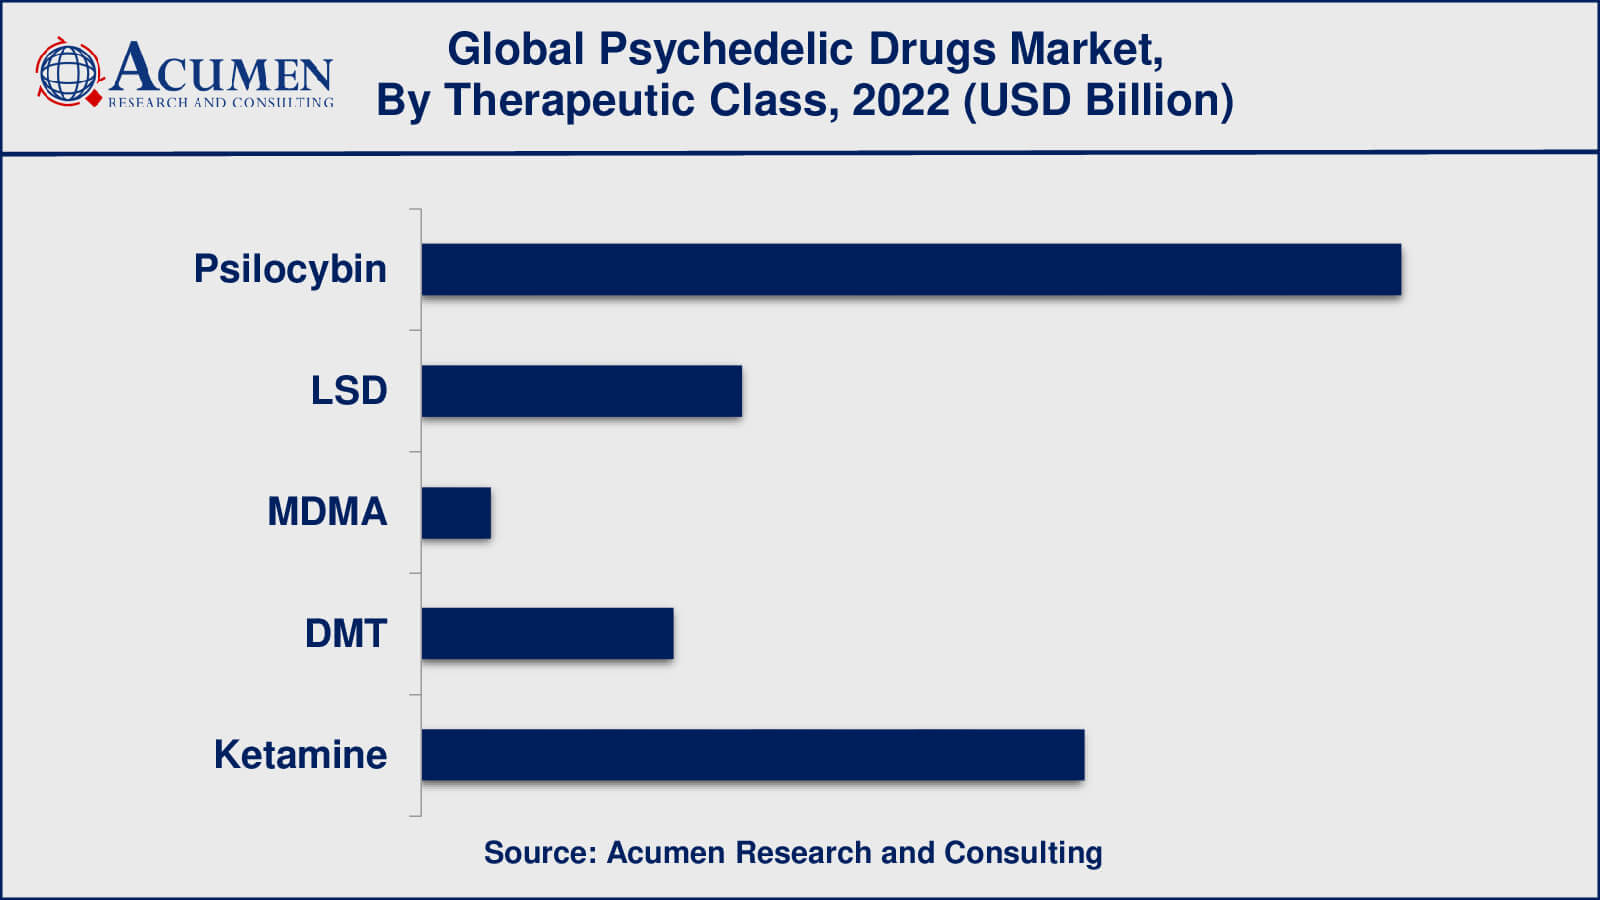 Psychedelic Drugs Market Drivers